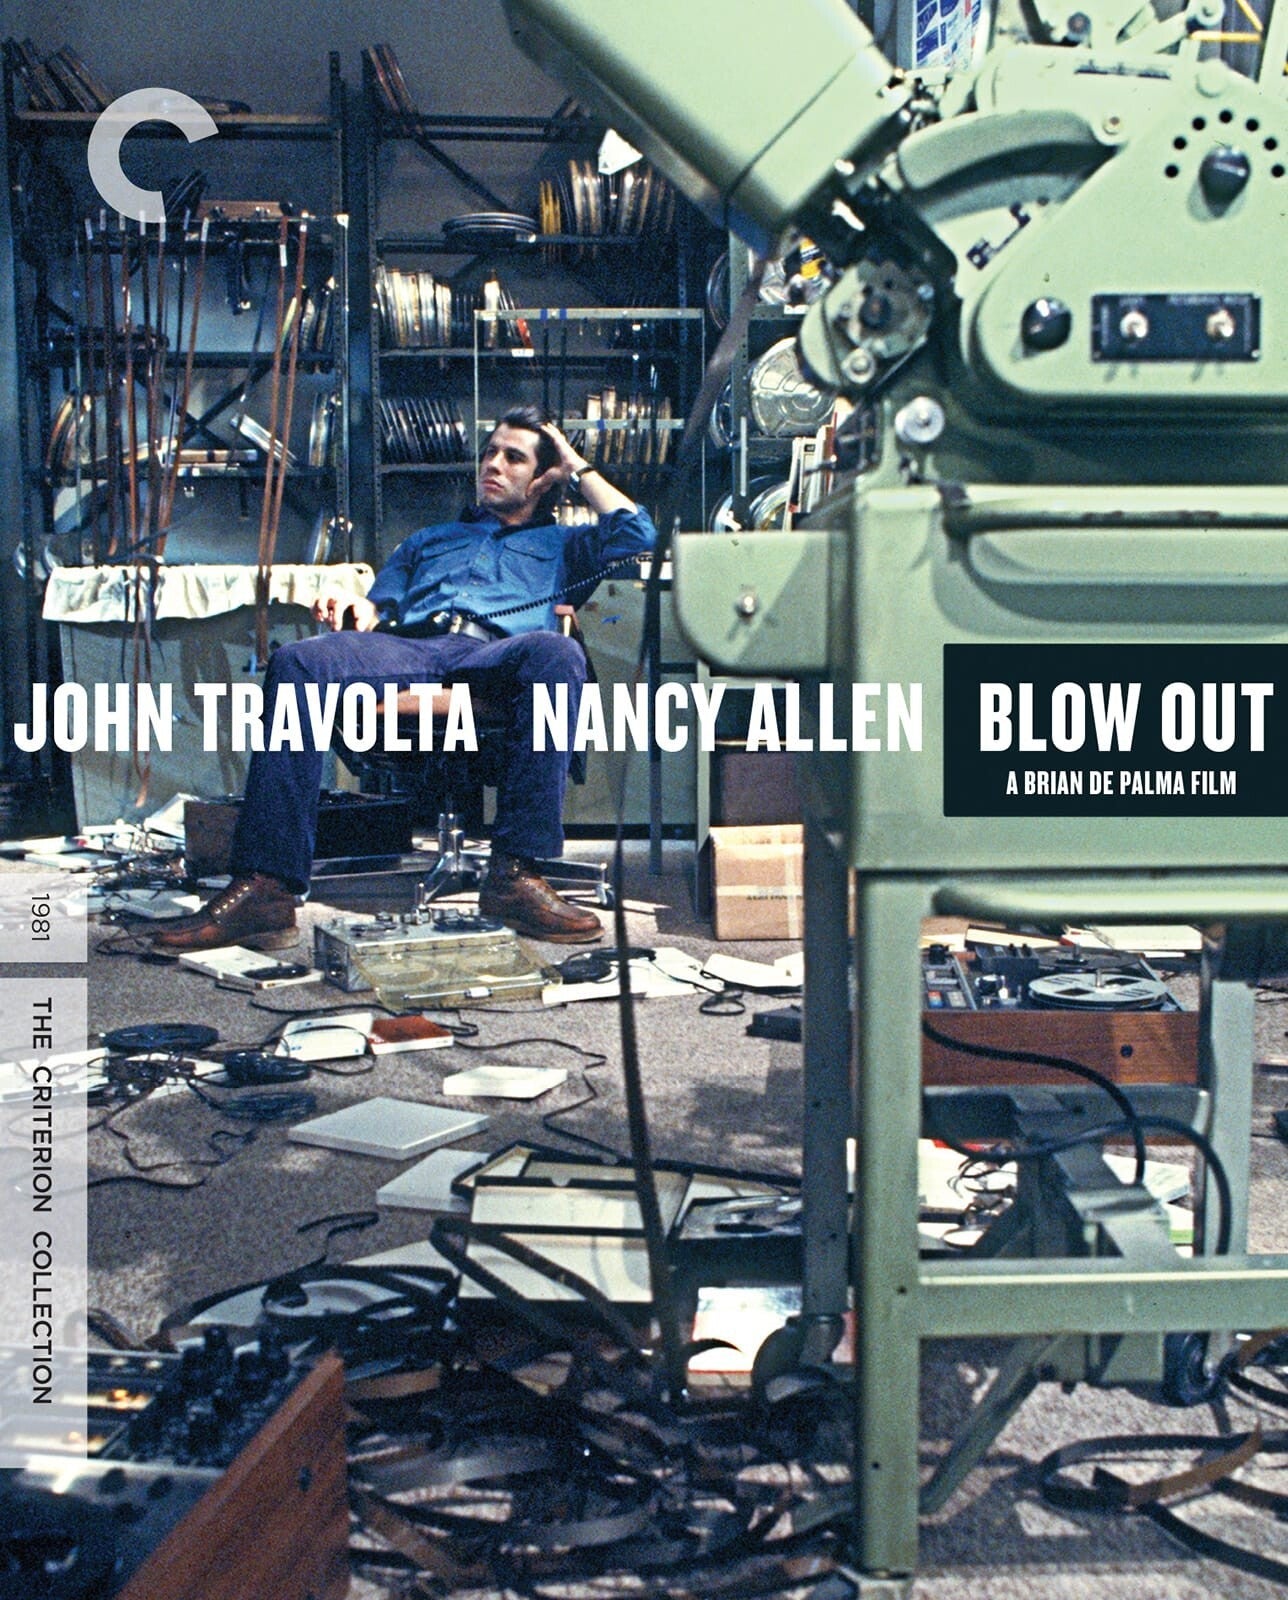 BLOW OUT 4K UHD/BLU-RAY